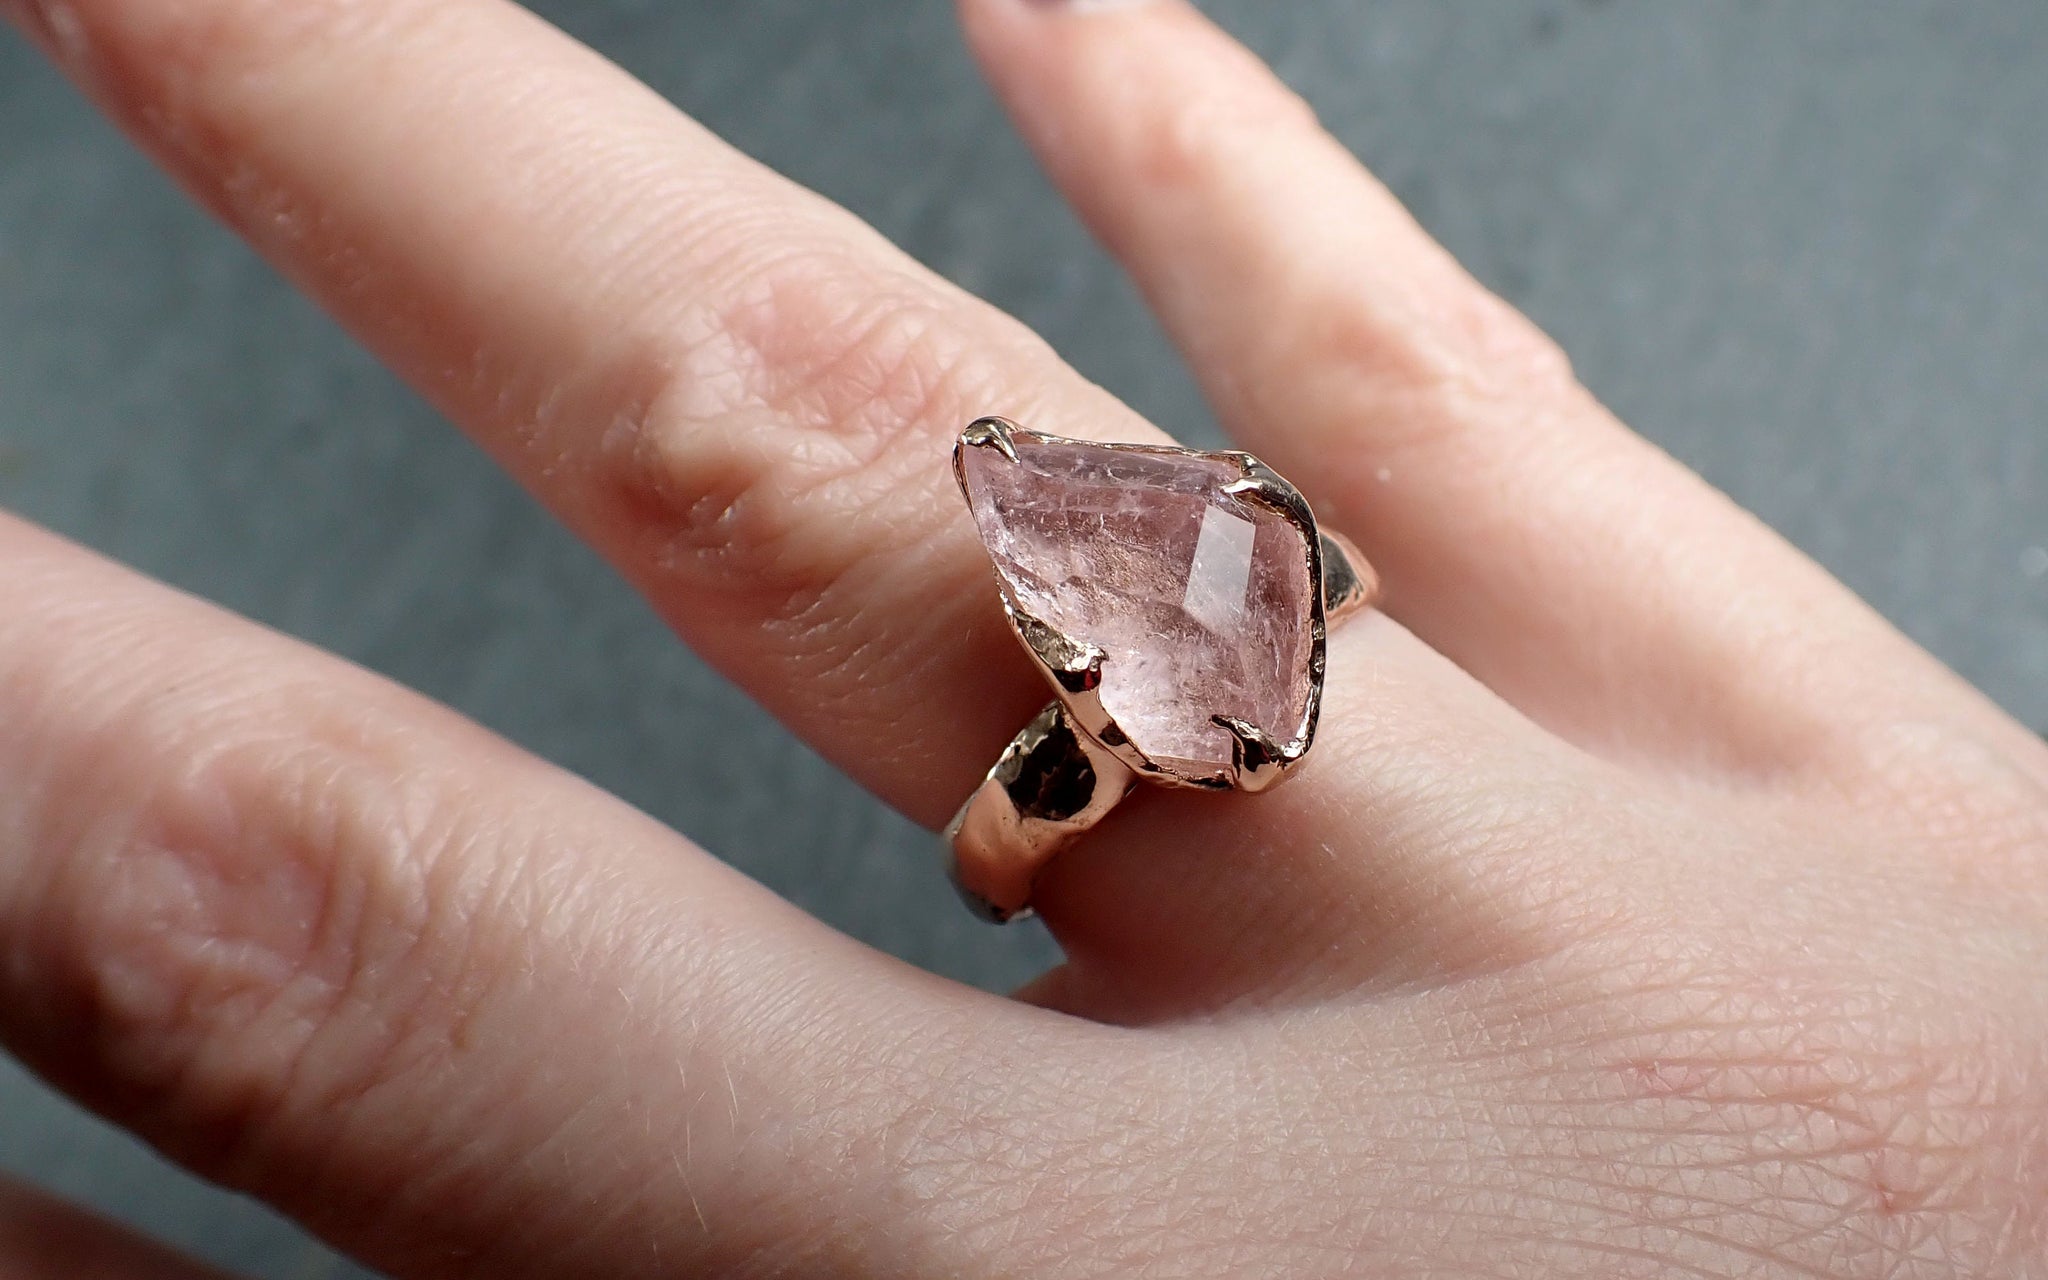 Morganite partially faceted 14k Rose gold solitaire Pink Gemstone Cocktail Ring Statement Ring gemstone Jewelry by Angeline 3049